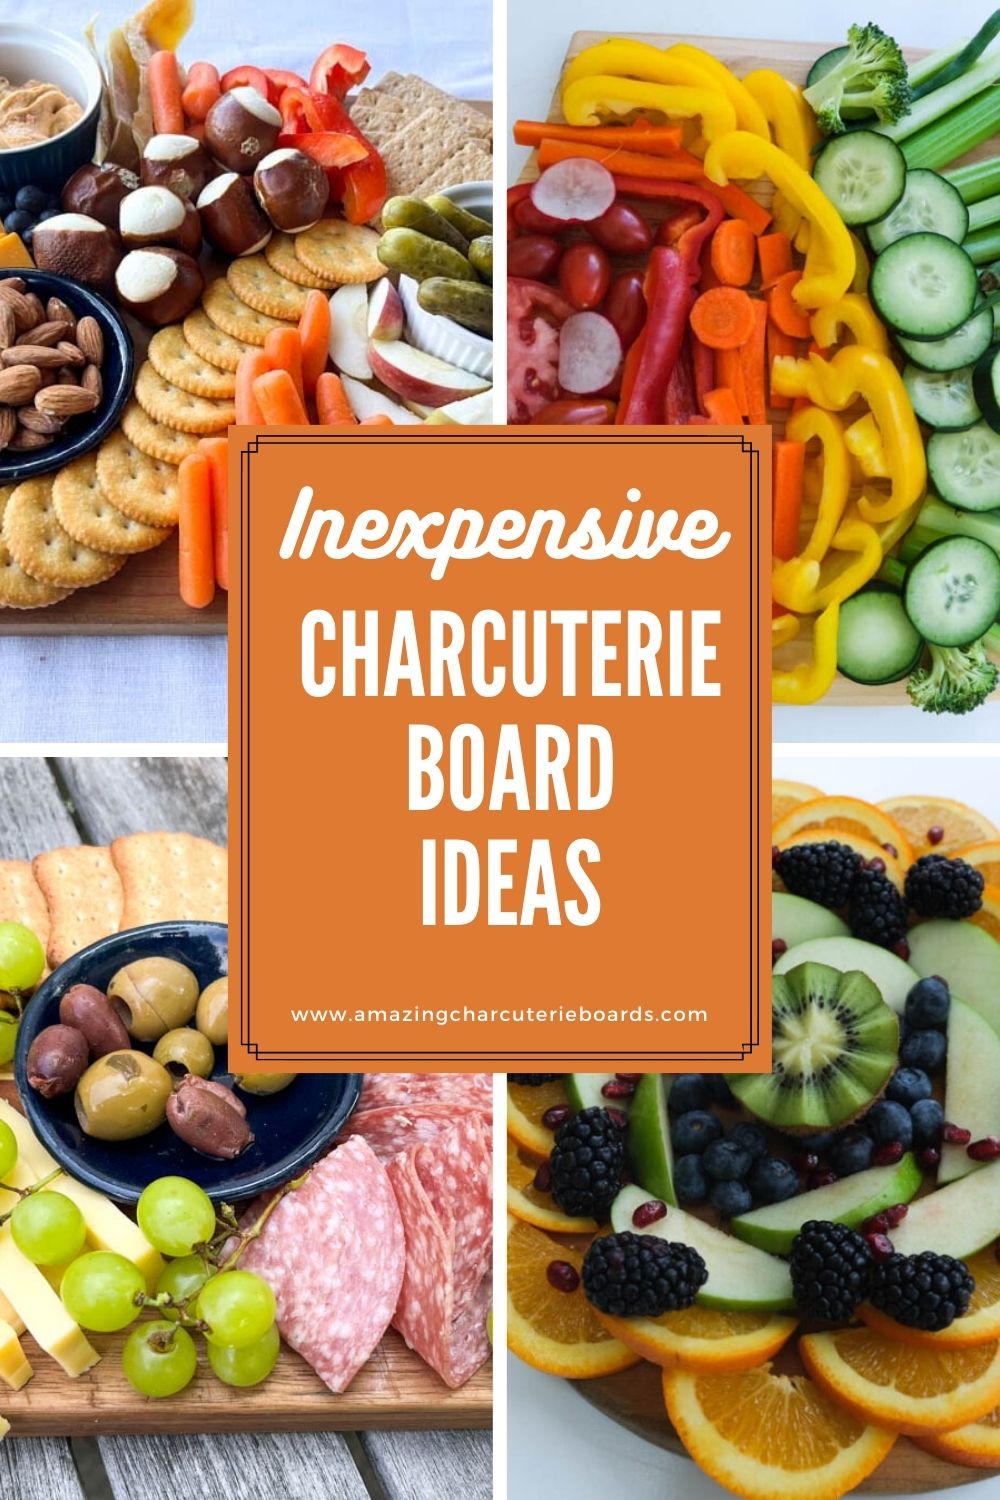 8 Inexpensive Charcuterie Board Ideas: Cheap and Easy Recipes - Amazing ...